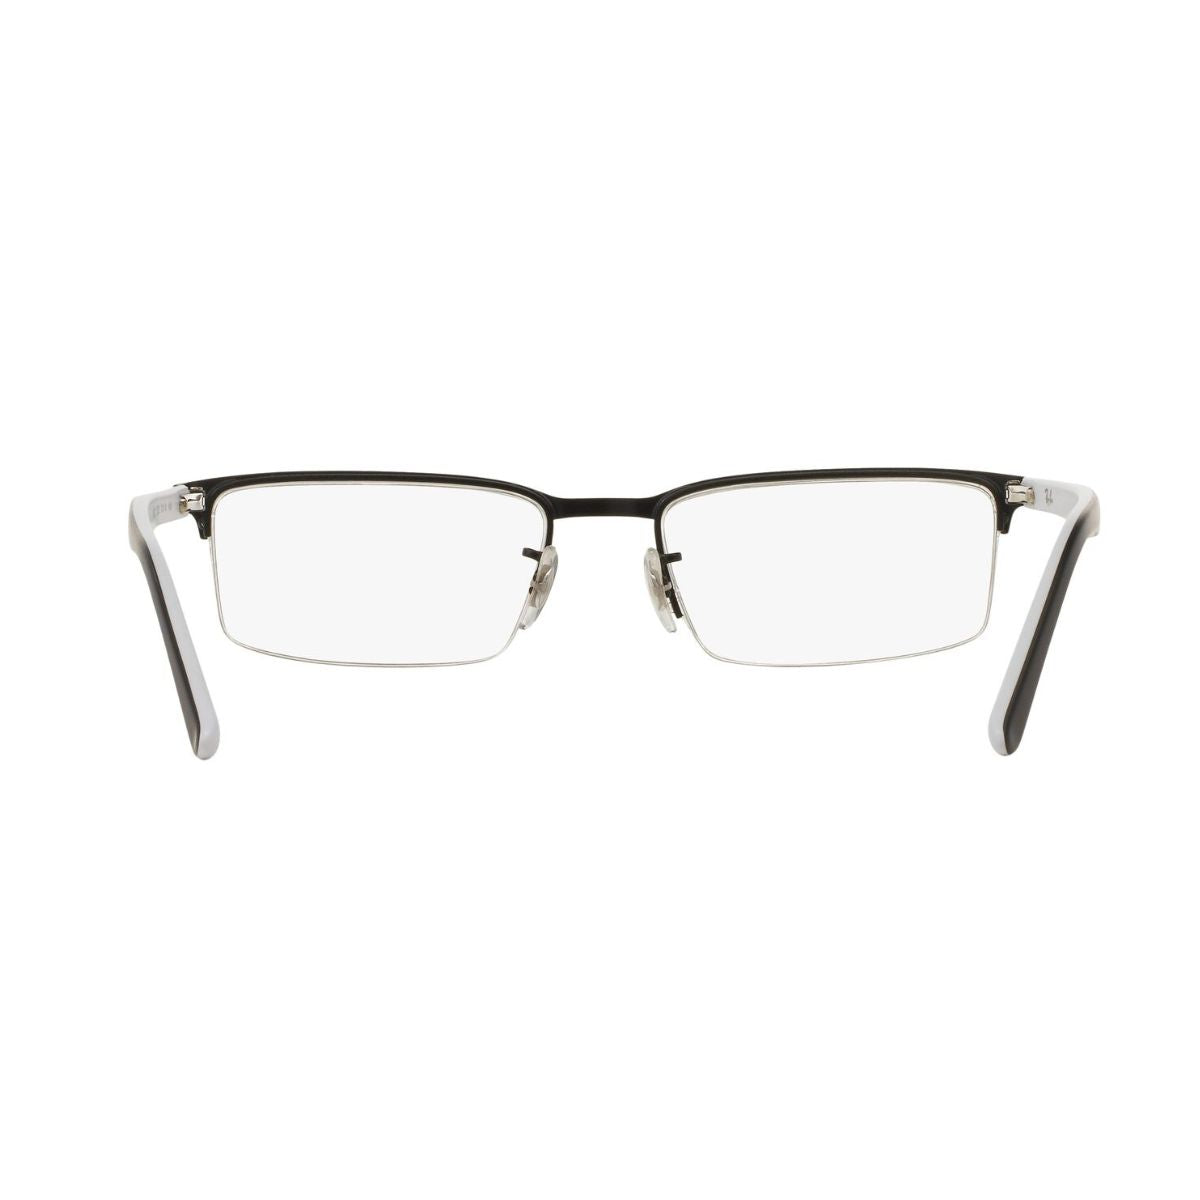 "Rayban 6271I 2802 spactacle frame for men and women online at optorium"